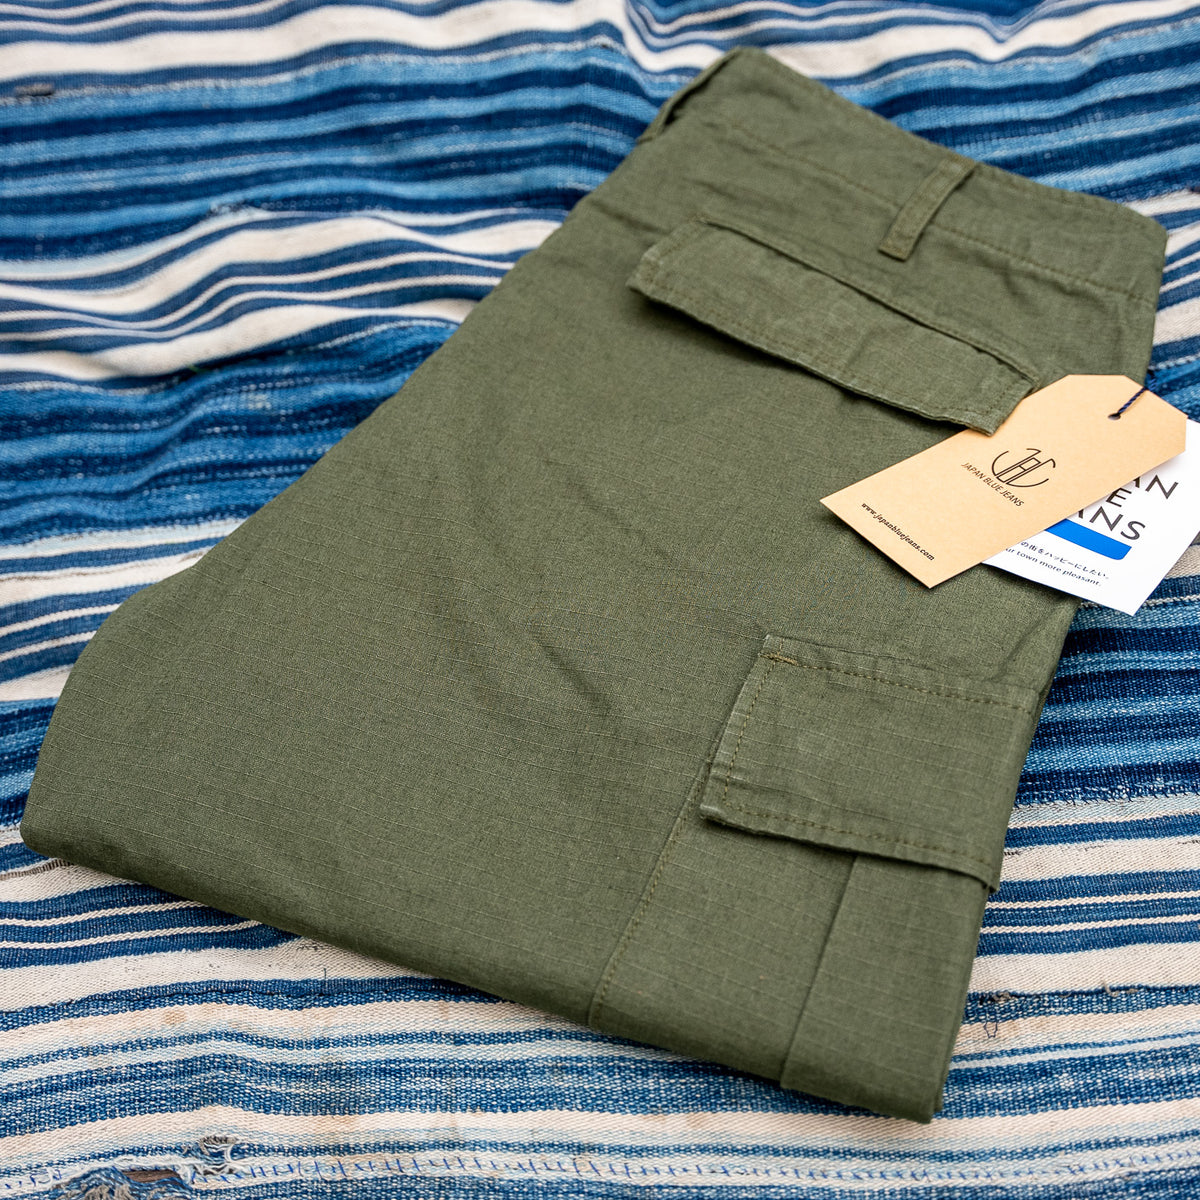 Japan Blue 9,5oz Fatigue Ripstop Modern Military Cargo – Olive Drab /